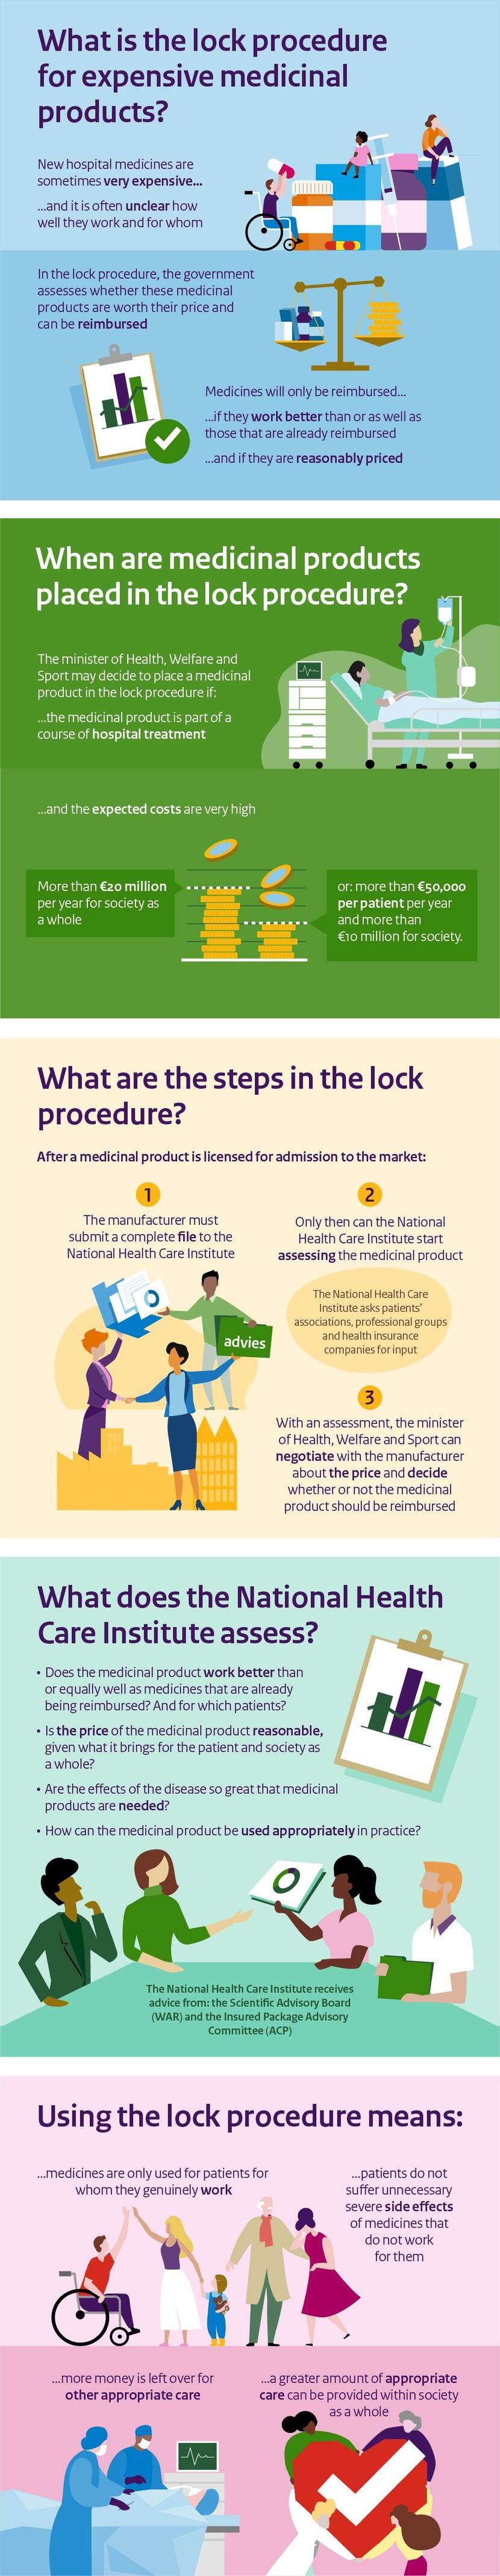 Infographic - Lock procedure for expensive medicinal products